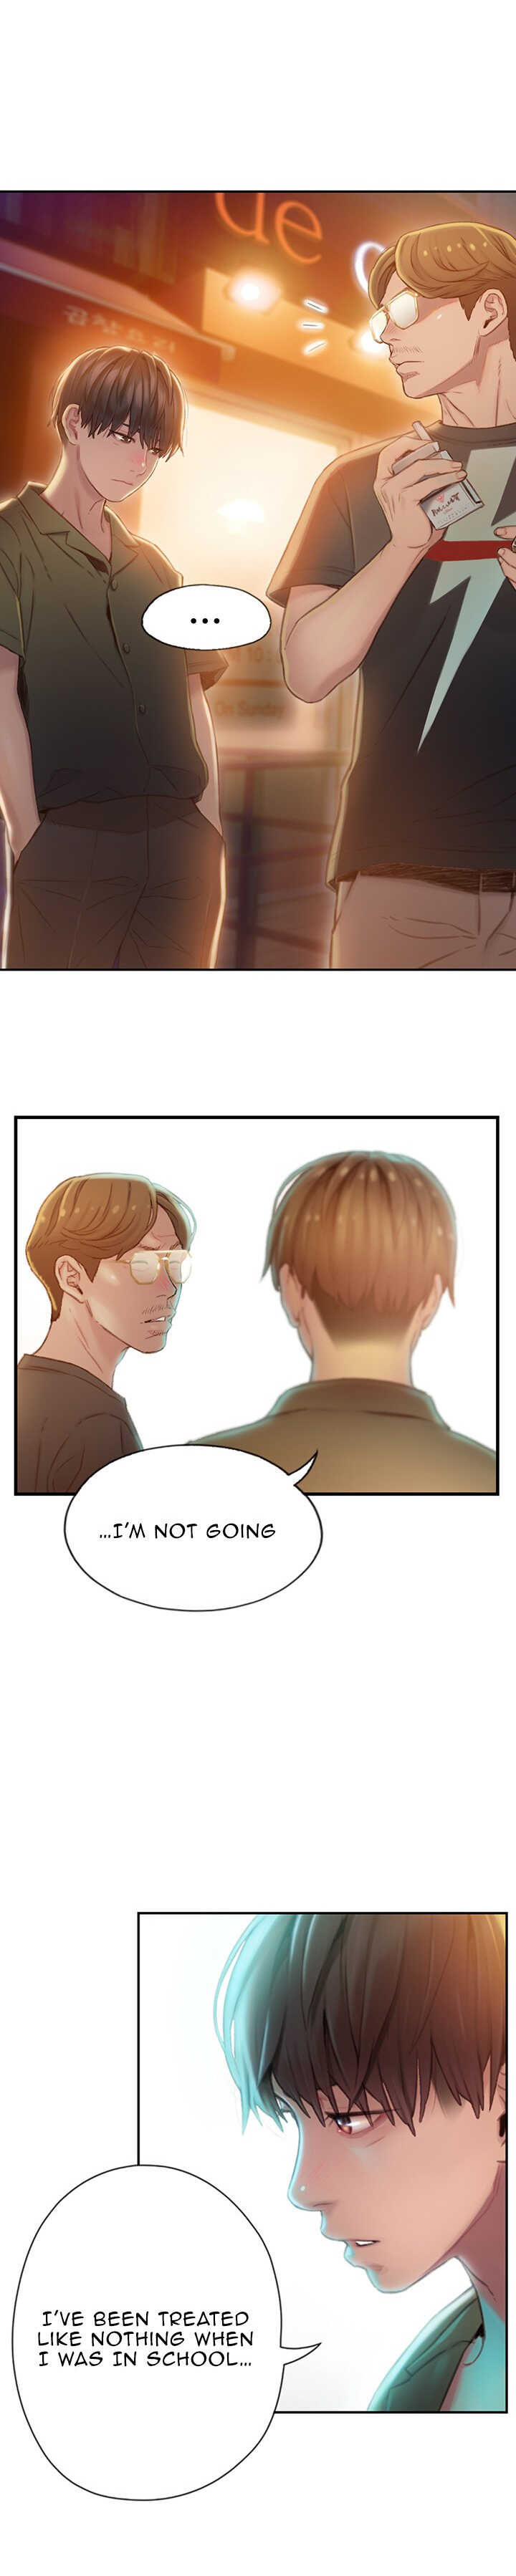 [Park Hyeongjun] Love Limit Exceeded (01-20) Ongoing - Page 27